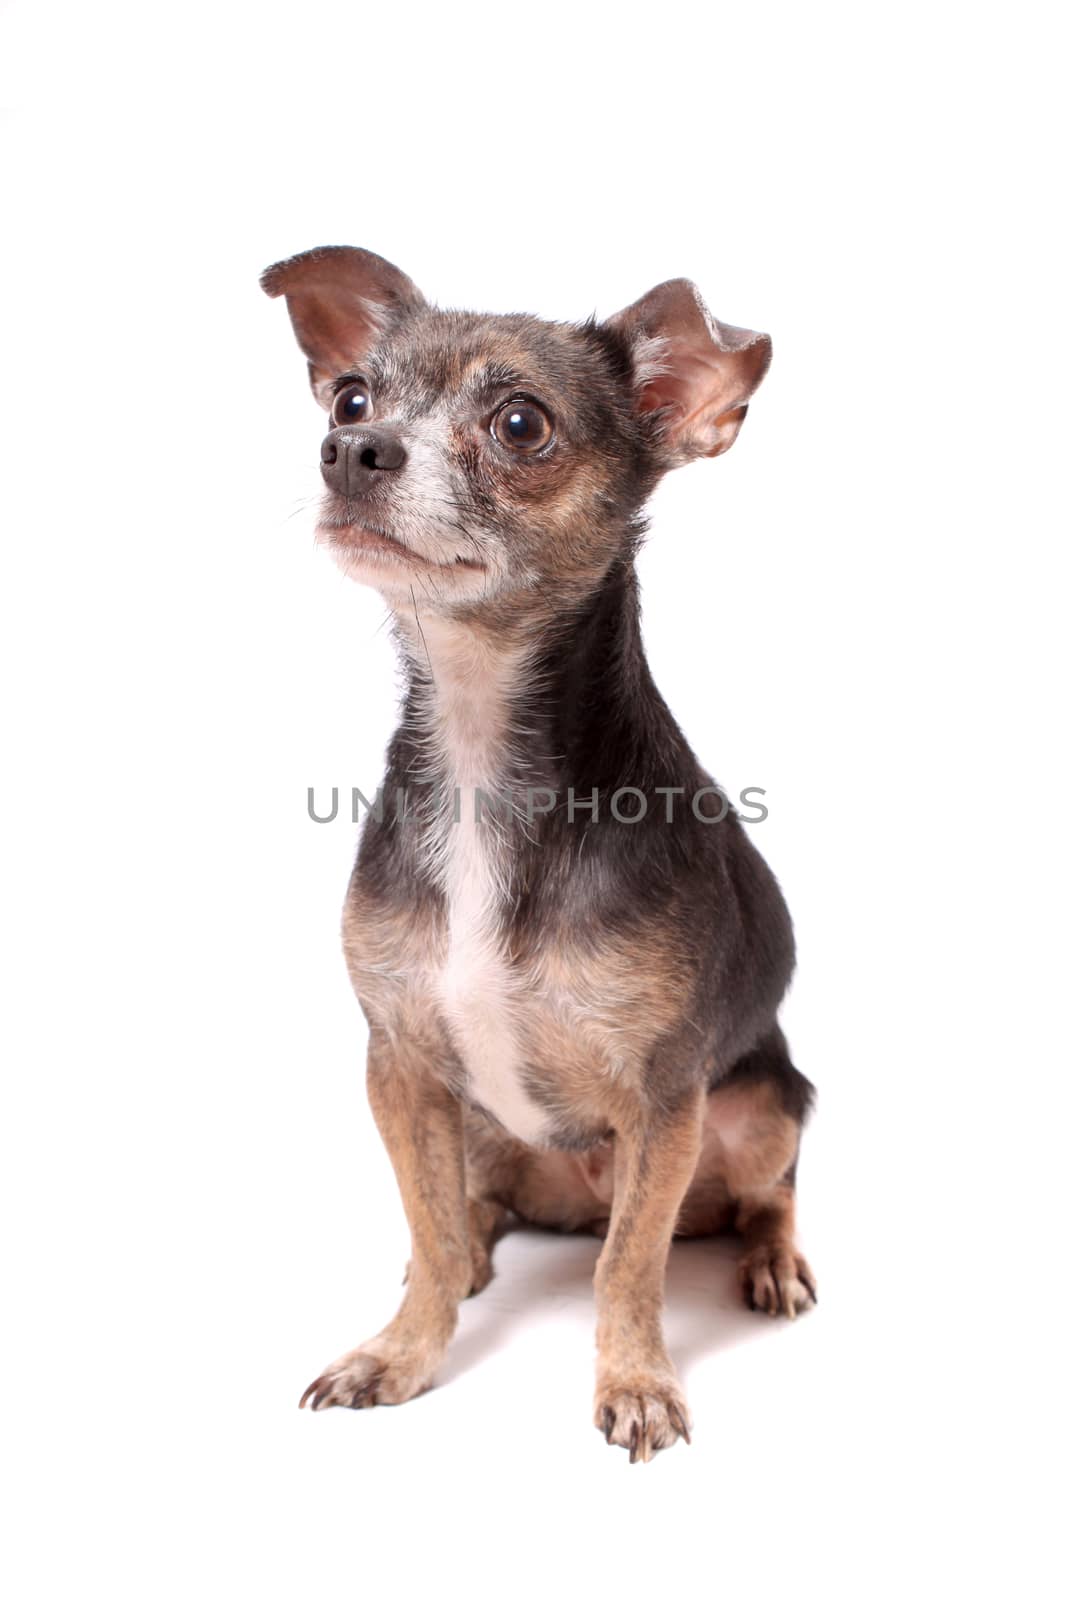 Cute little chihuahua sitting  dog portrait on a white background